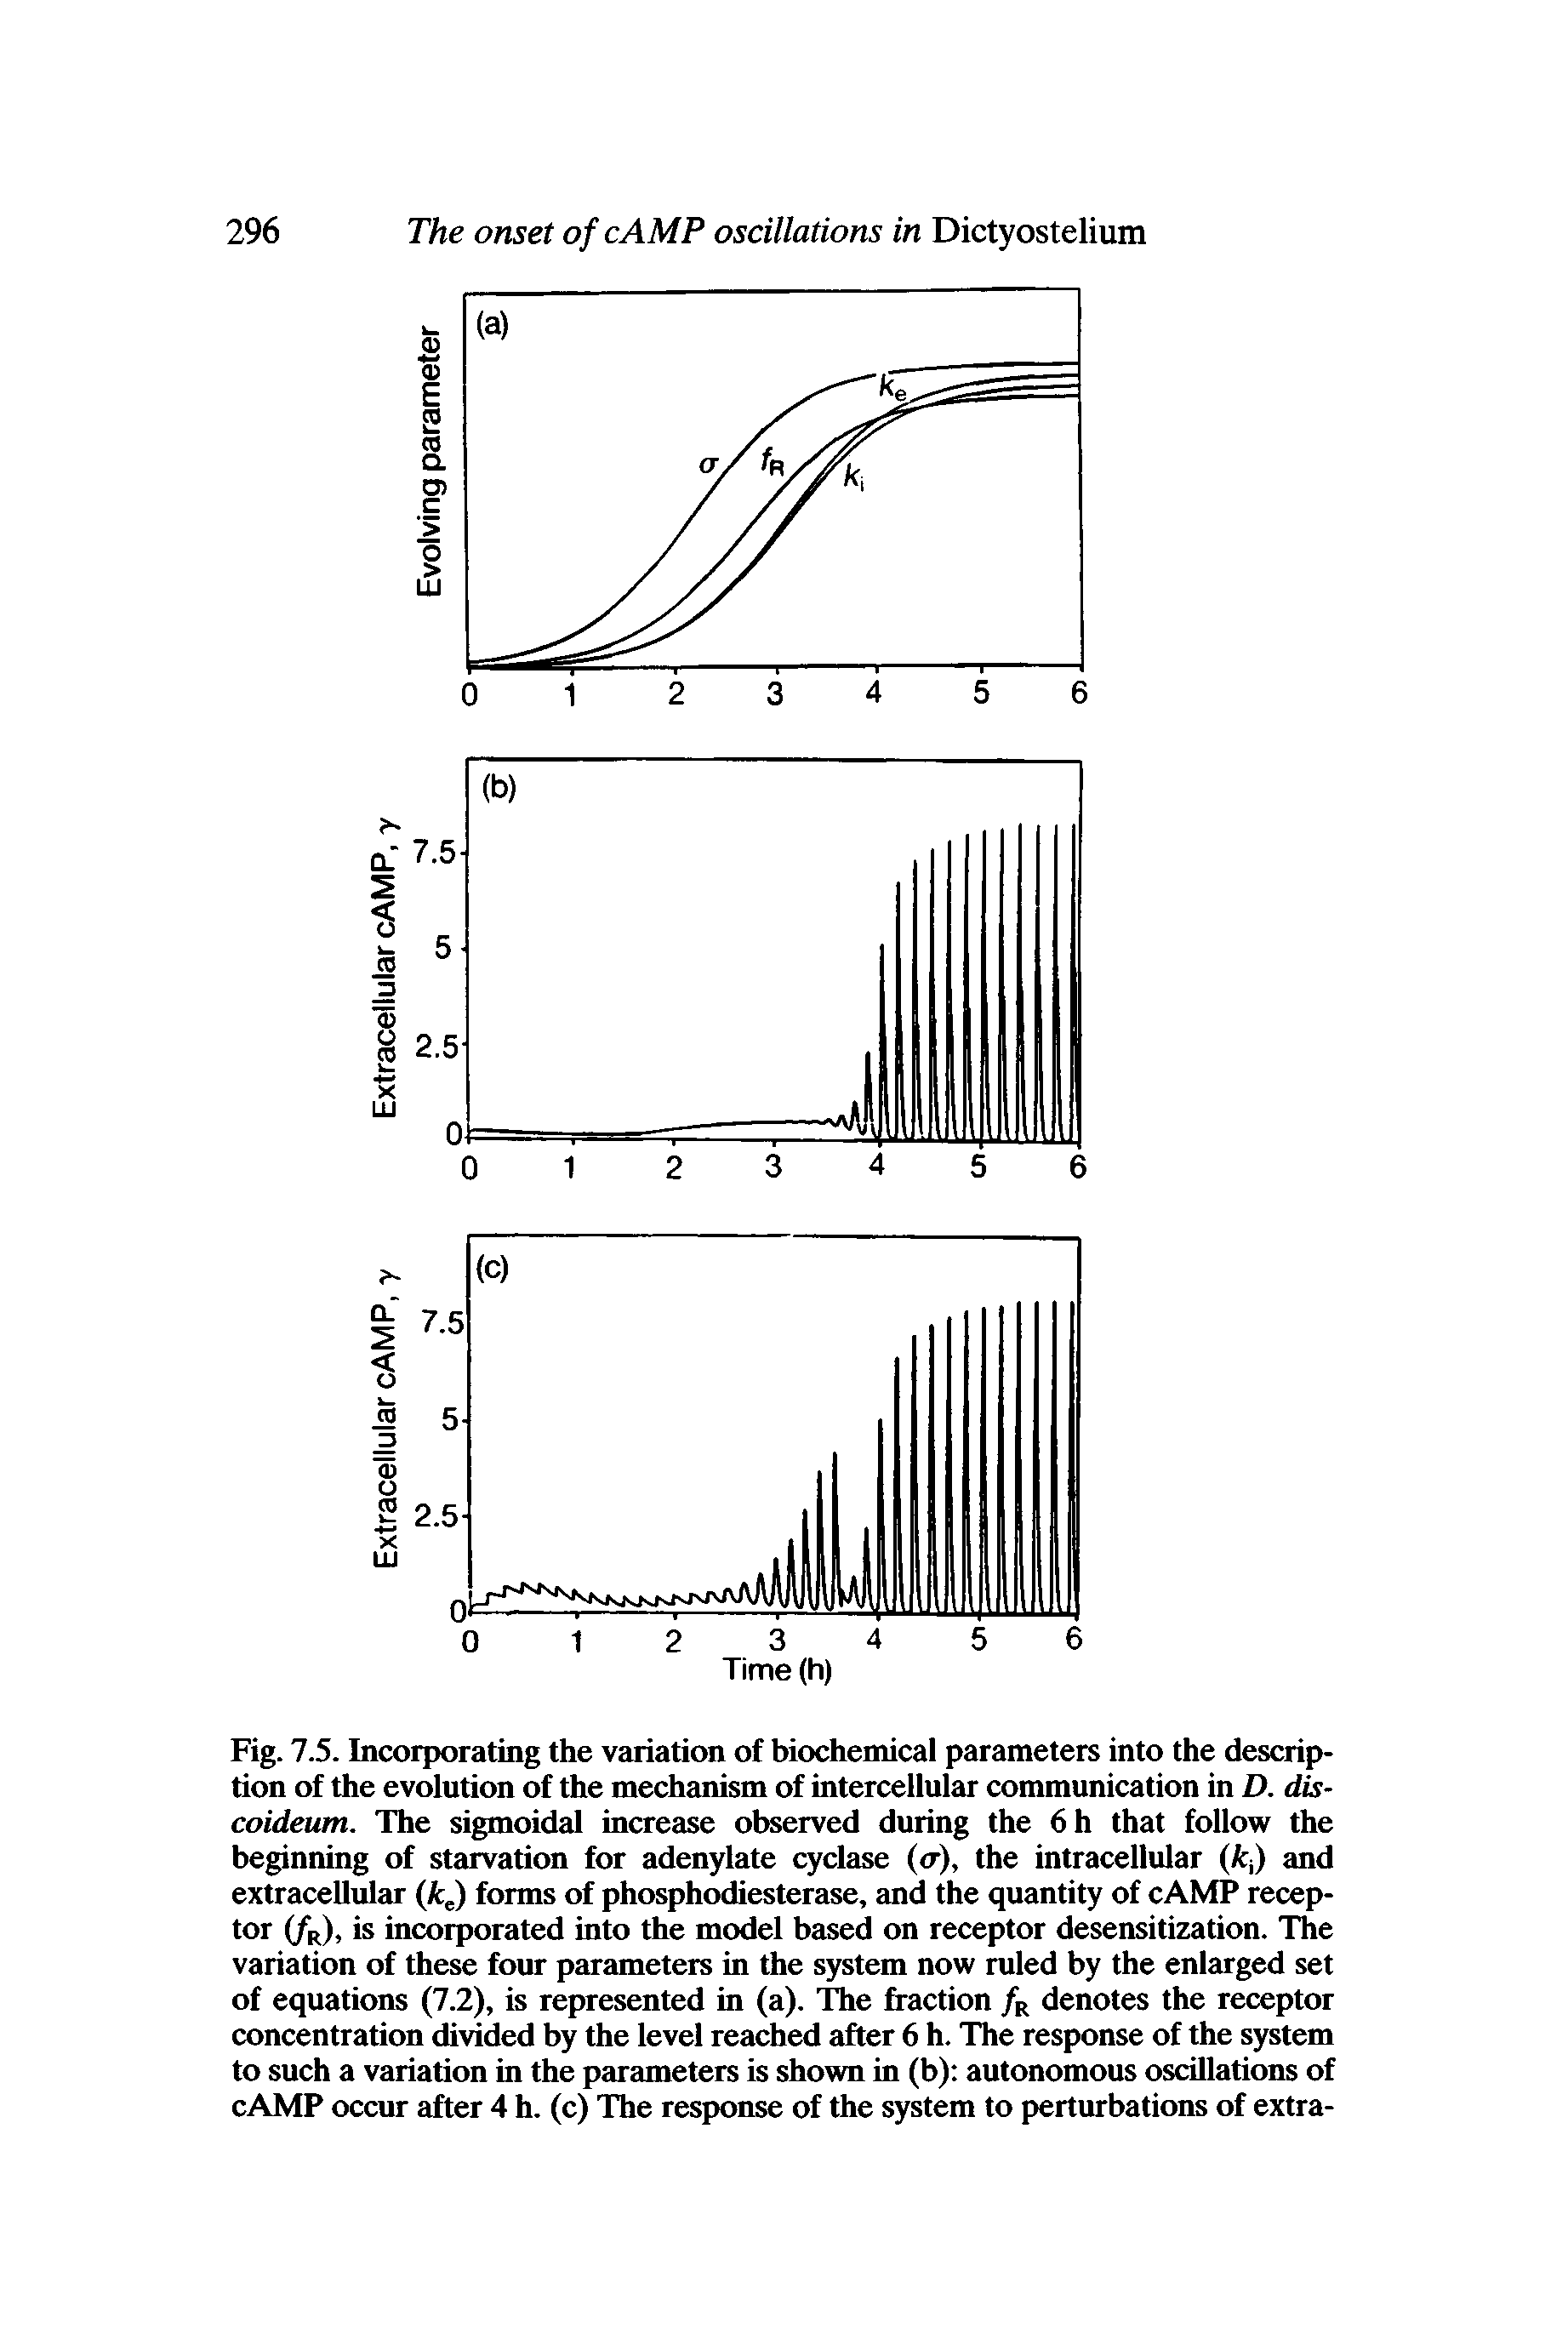 Fig. 7.5. Incorporating the variation of biochemical parameters into the description of the evolution of the mechanism of intercellular communication in D. dis-coideum. The sigmoidal increase observed during the 6h that follow the beginning of starvation for adenylate cyclase (<r), the intracellular (fcj) and extracellular (fcJ forms of phosphodiesterase, and the quantity of cAMP receptor iff), is incorporated into the model based on receptor desensitization. The variation of these four parameters in the system now ruled by the enlarged set of equations (7.2), is represented in (a). The fraction /r denotes the receptor concentration divided by the level reached after 6 h. The response of the system to such a variation in the pcU ameters is shown in (b) autonomous oscillations of cAMP occur after 4 h. (c) The response of the system to perturbations of extra-...